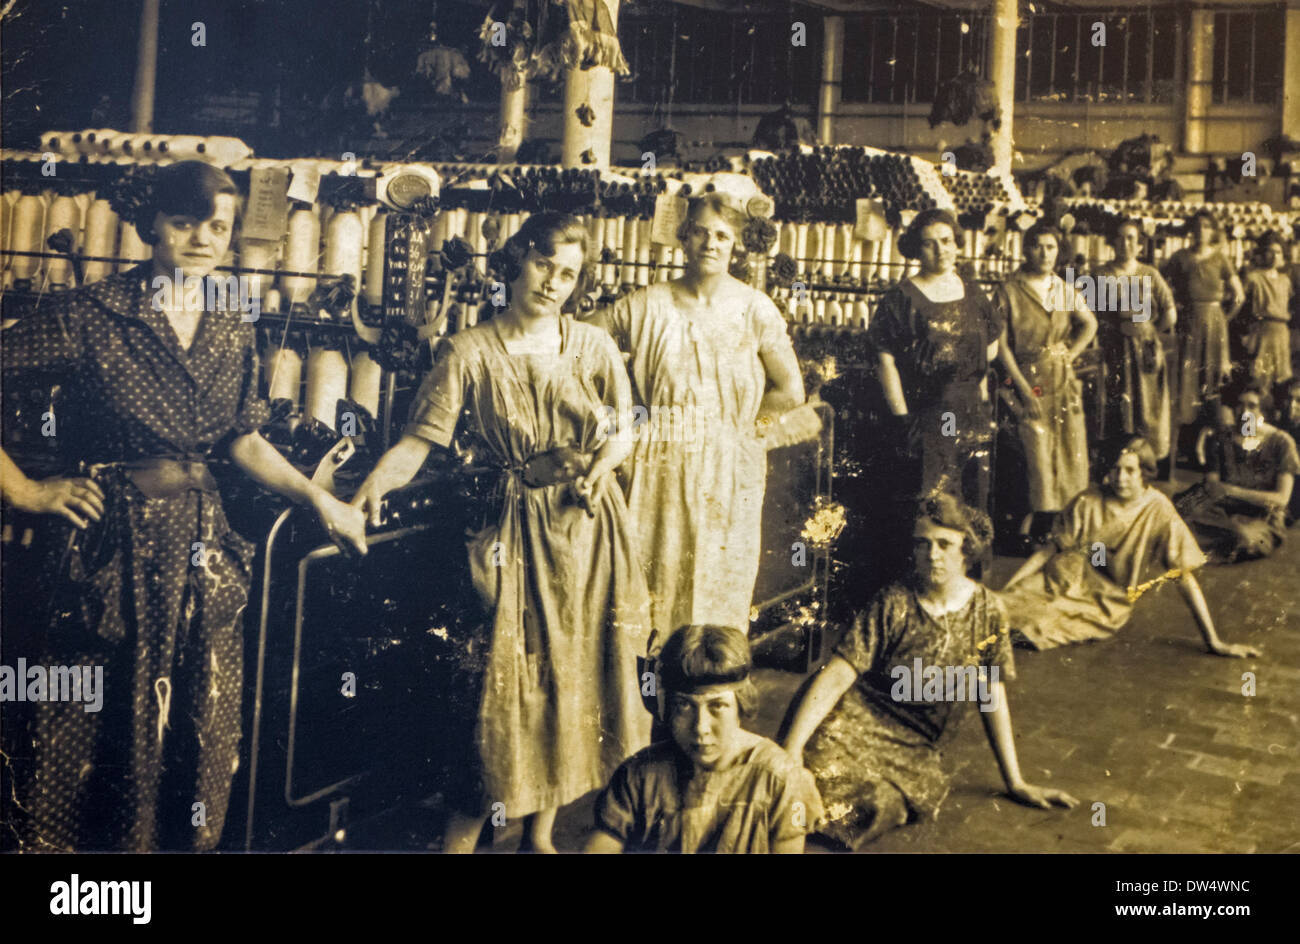 Old archival photograph showing female workers posing in spinning mill in the early twentieth century, Ghent, Belgium Stock Photo